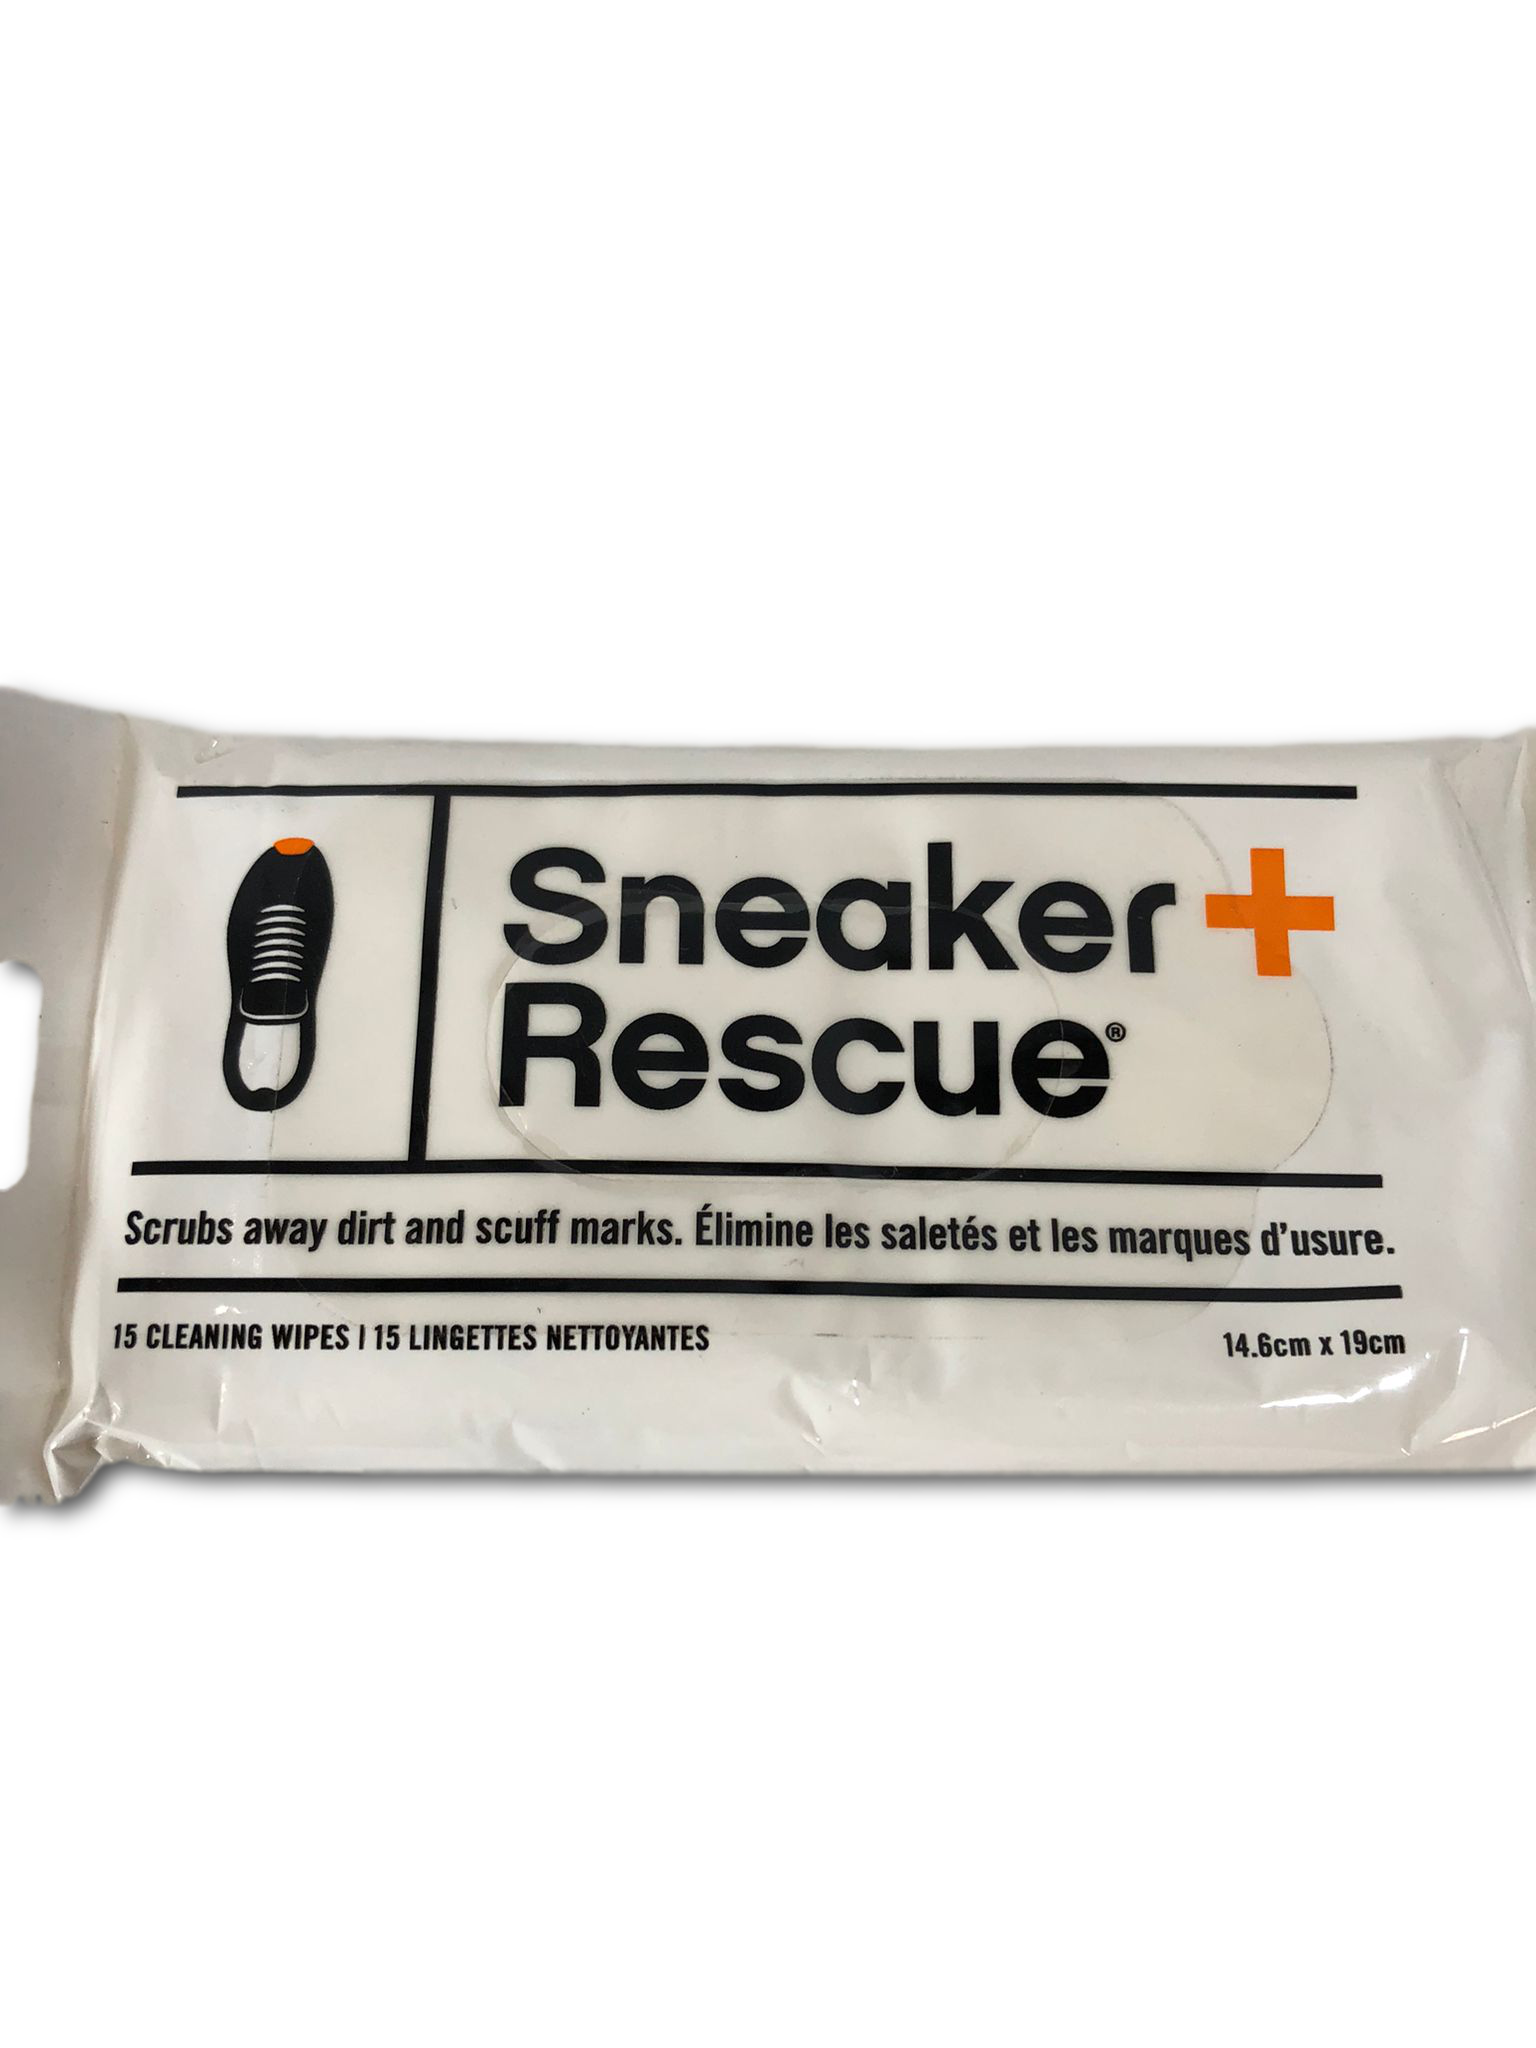 SneakerRescue All-Natural Sneaker Cleaning Wipes 3 pack- Resealable Pack